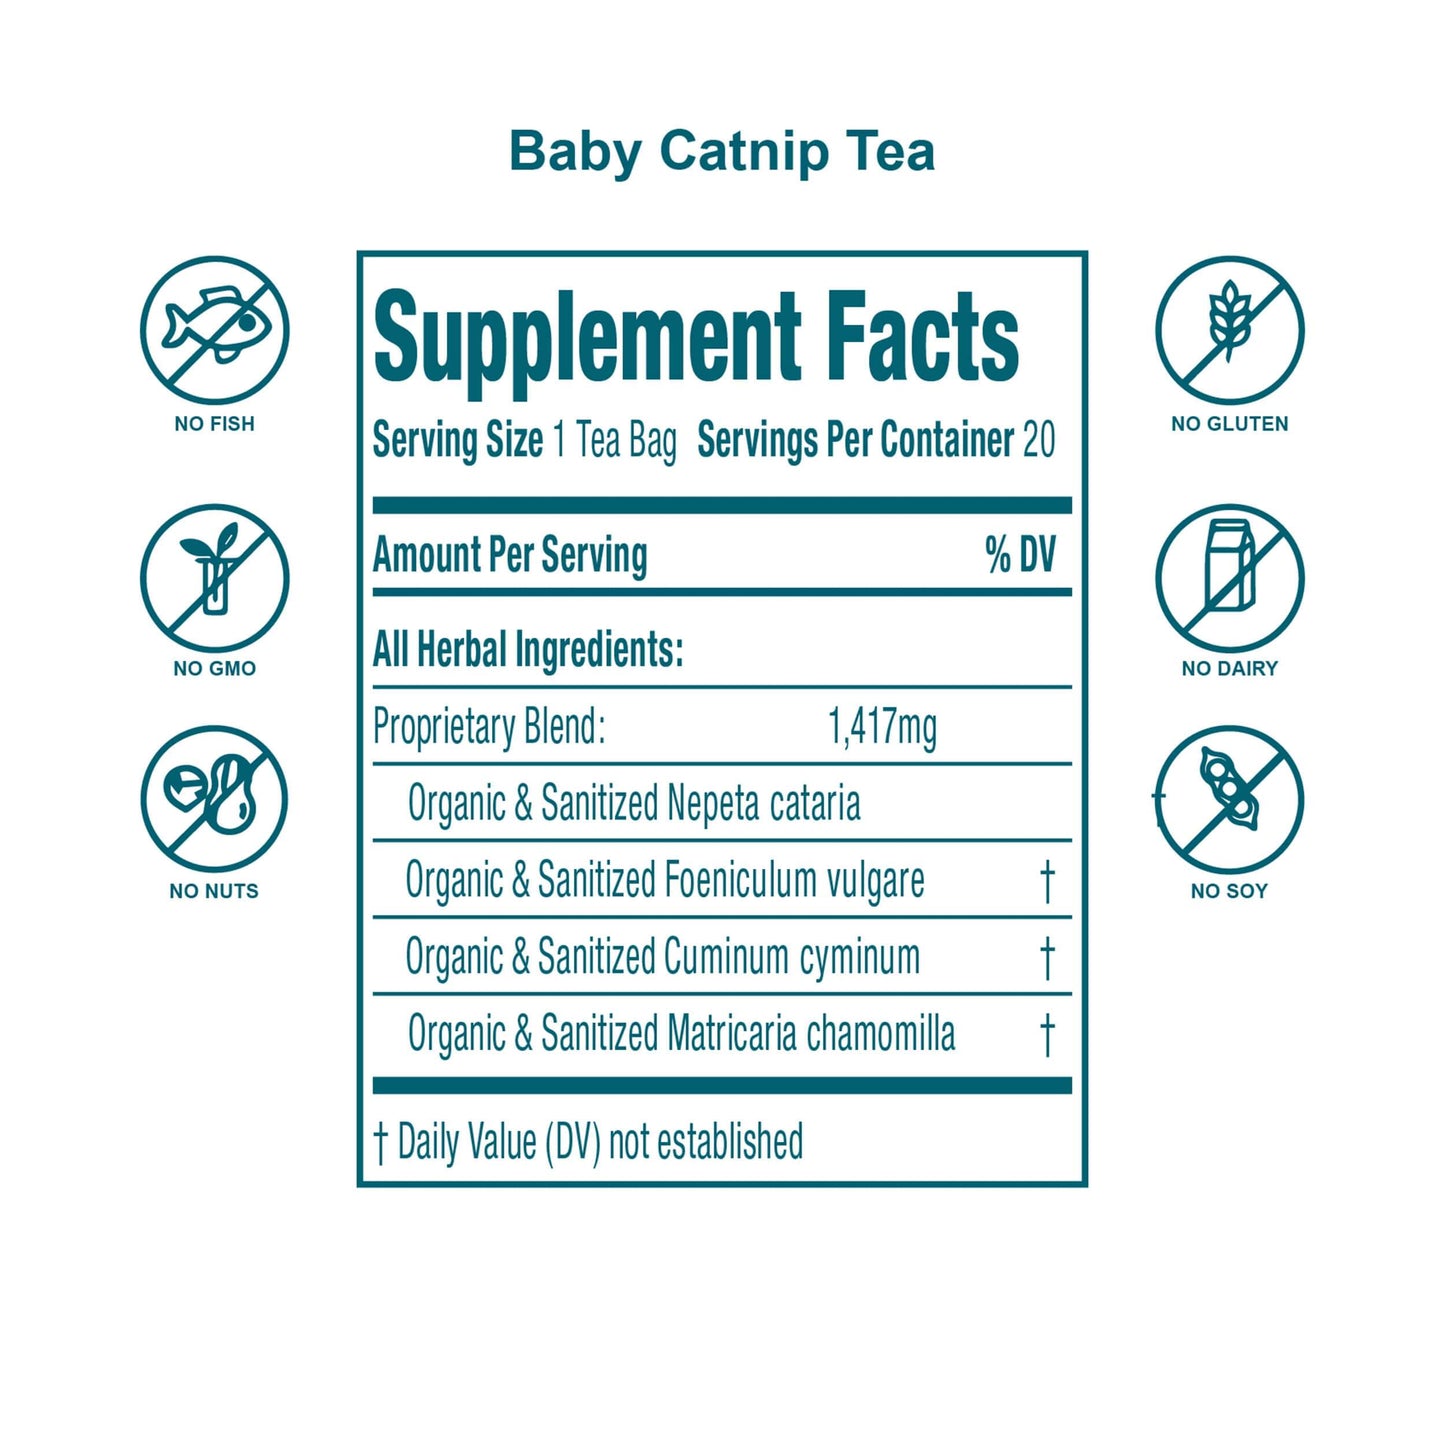 Catnip Tea for Babies- All Natural Colic Relief